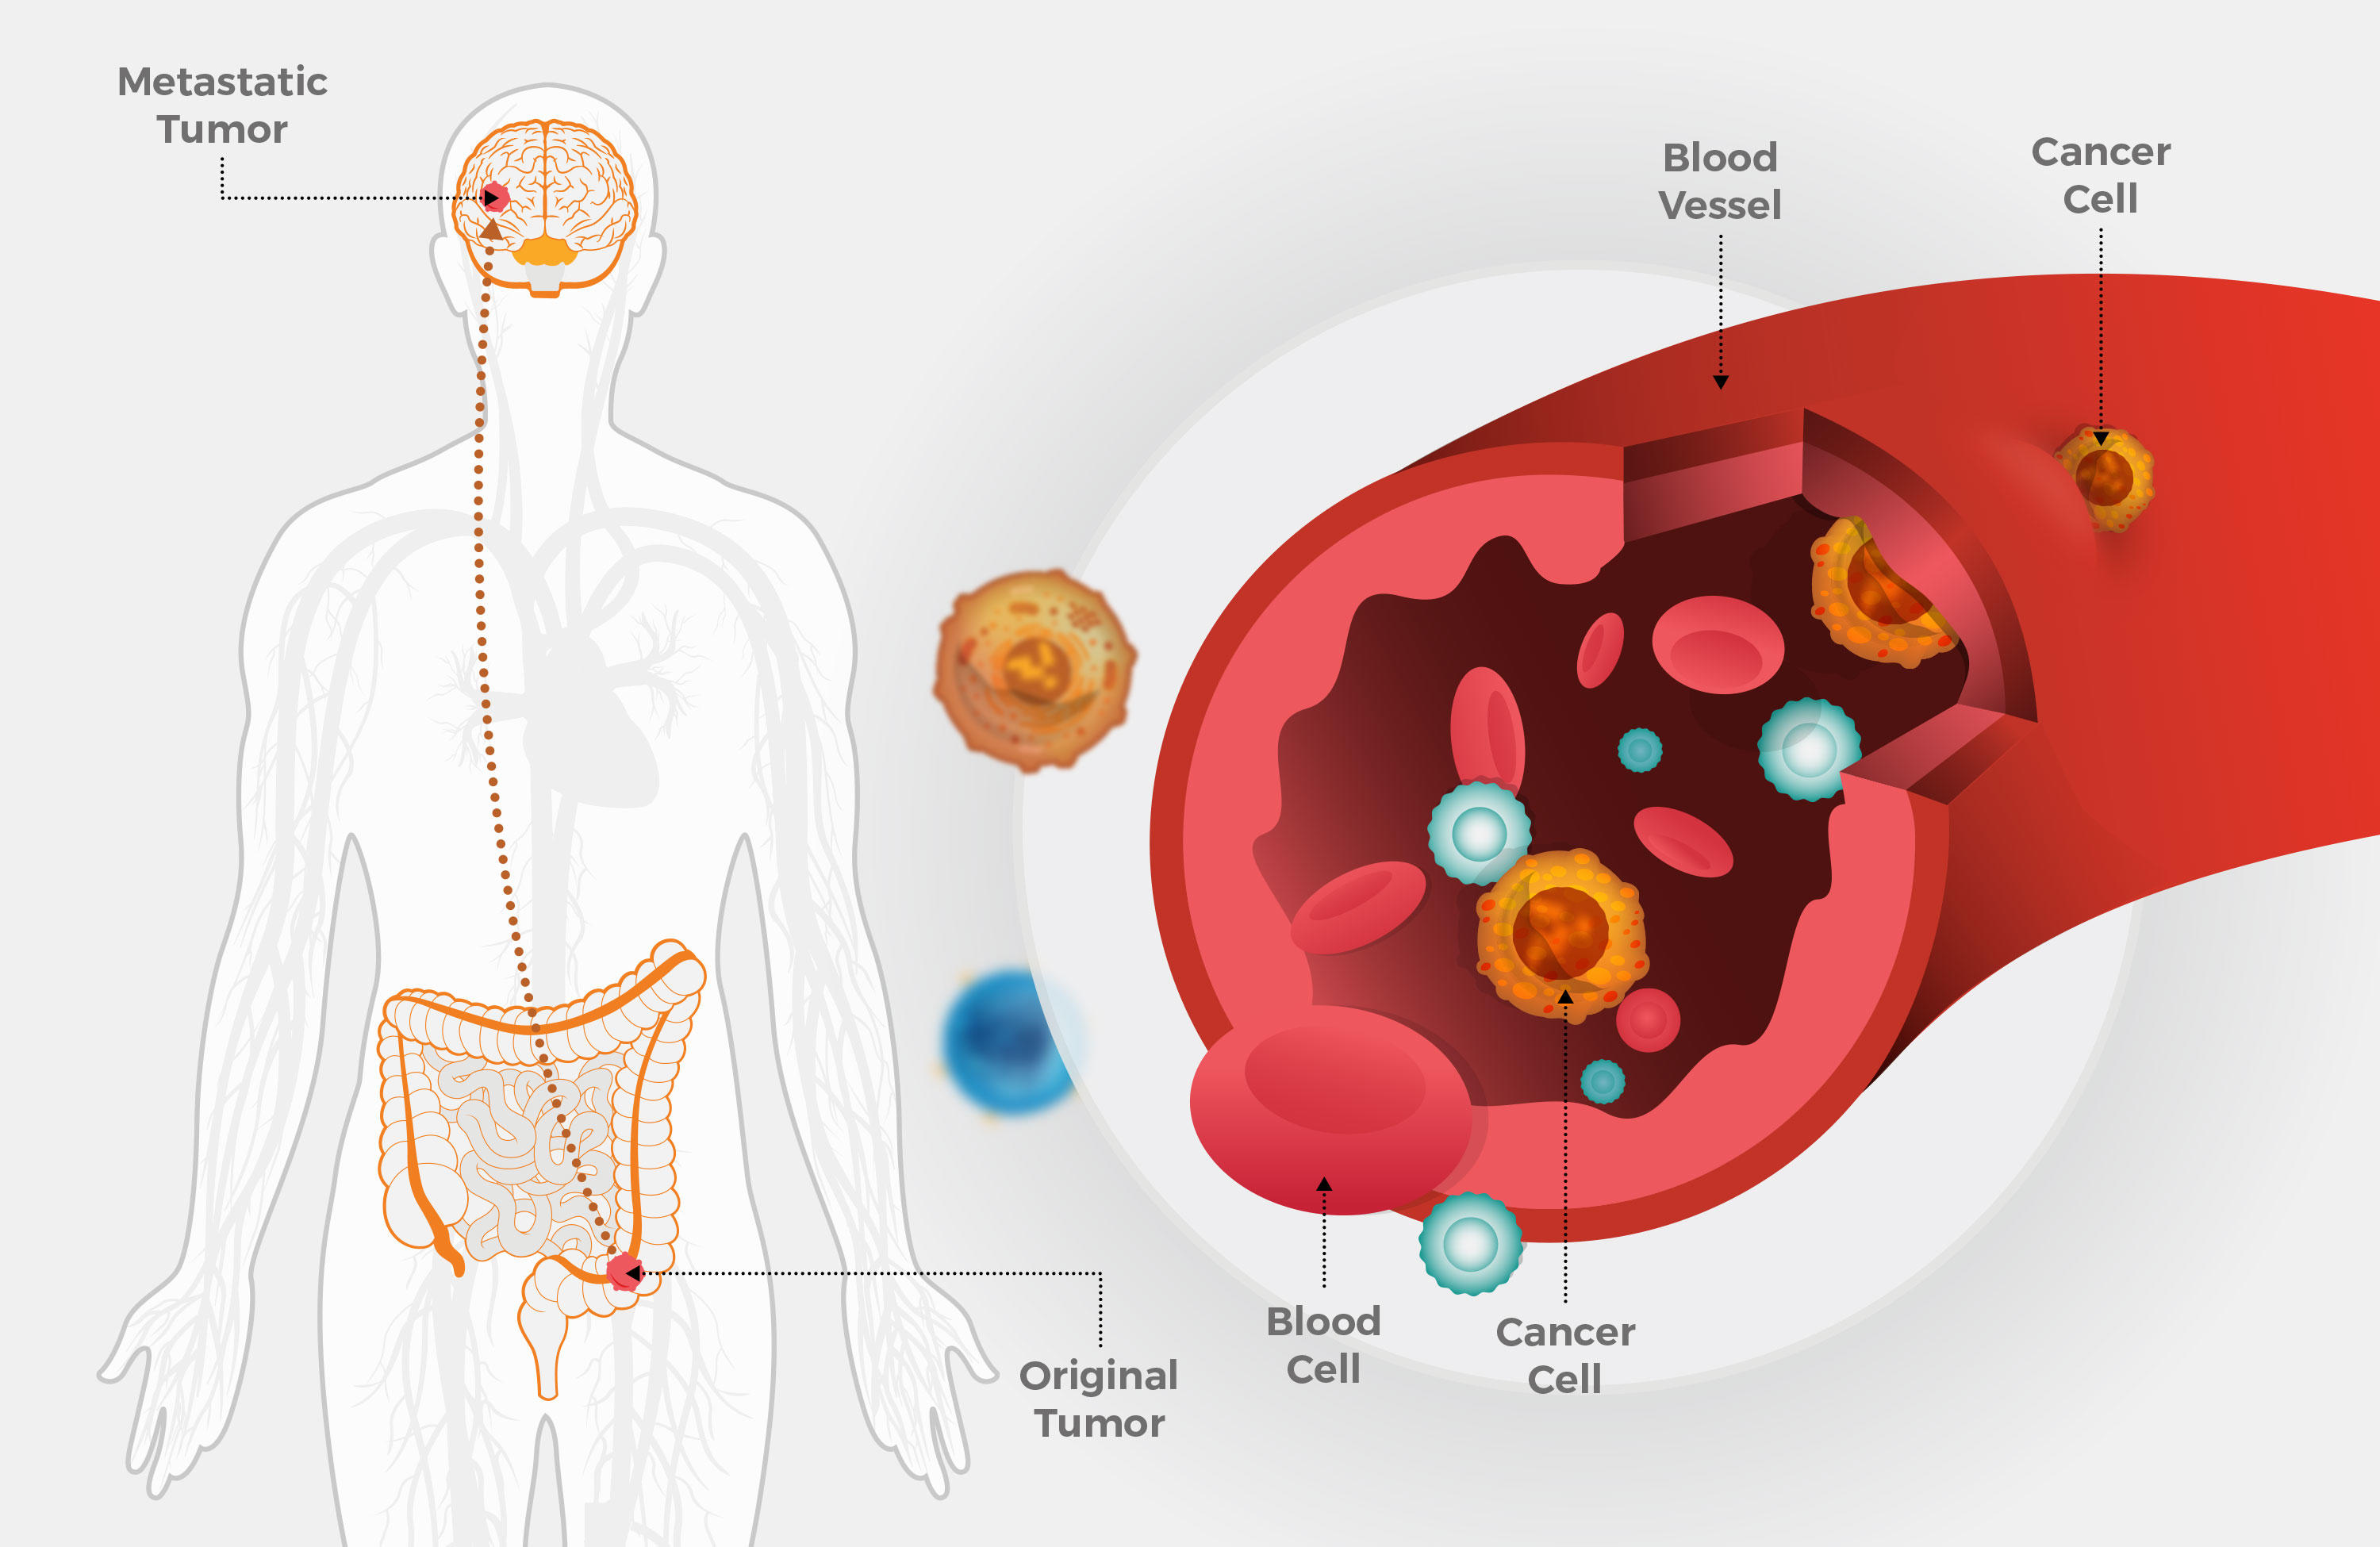 Serum and tumor microenvironment IL-8 values in different stages of colorectal cancer.